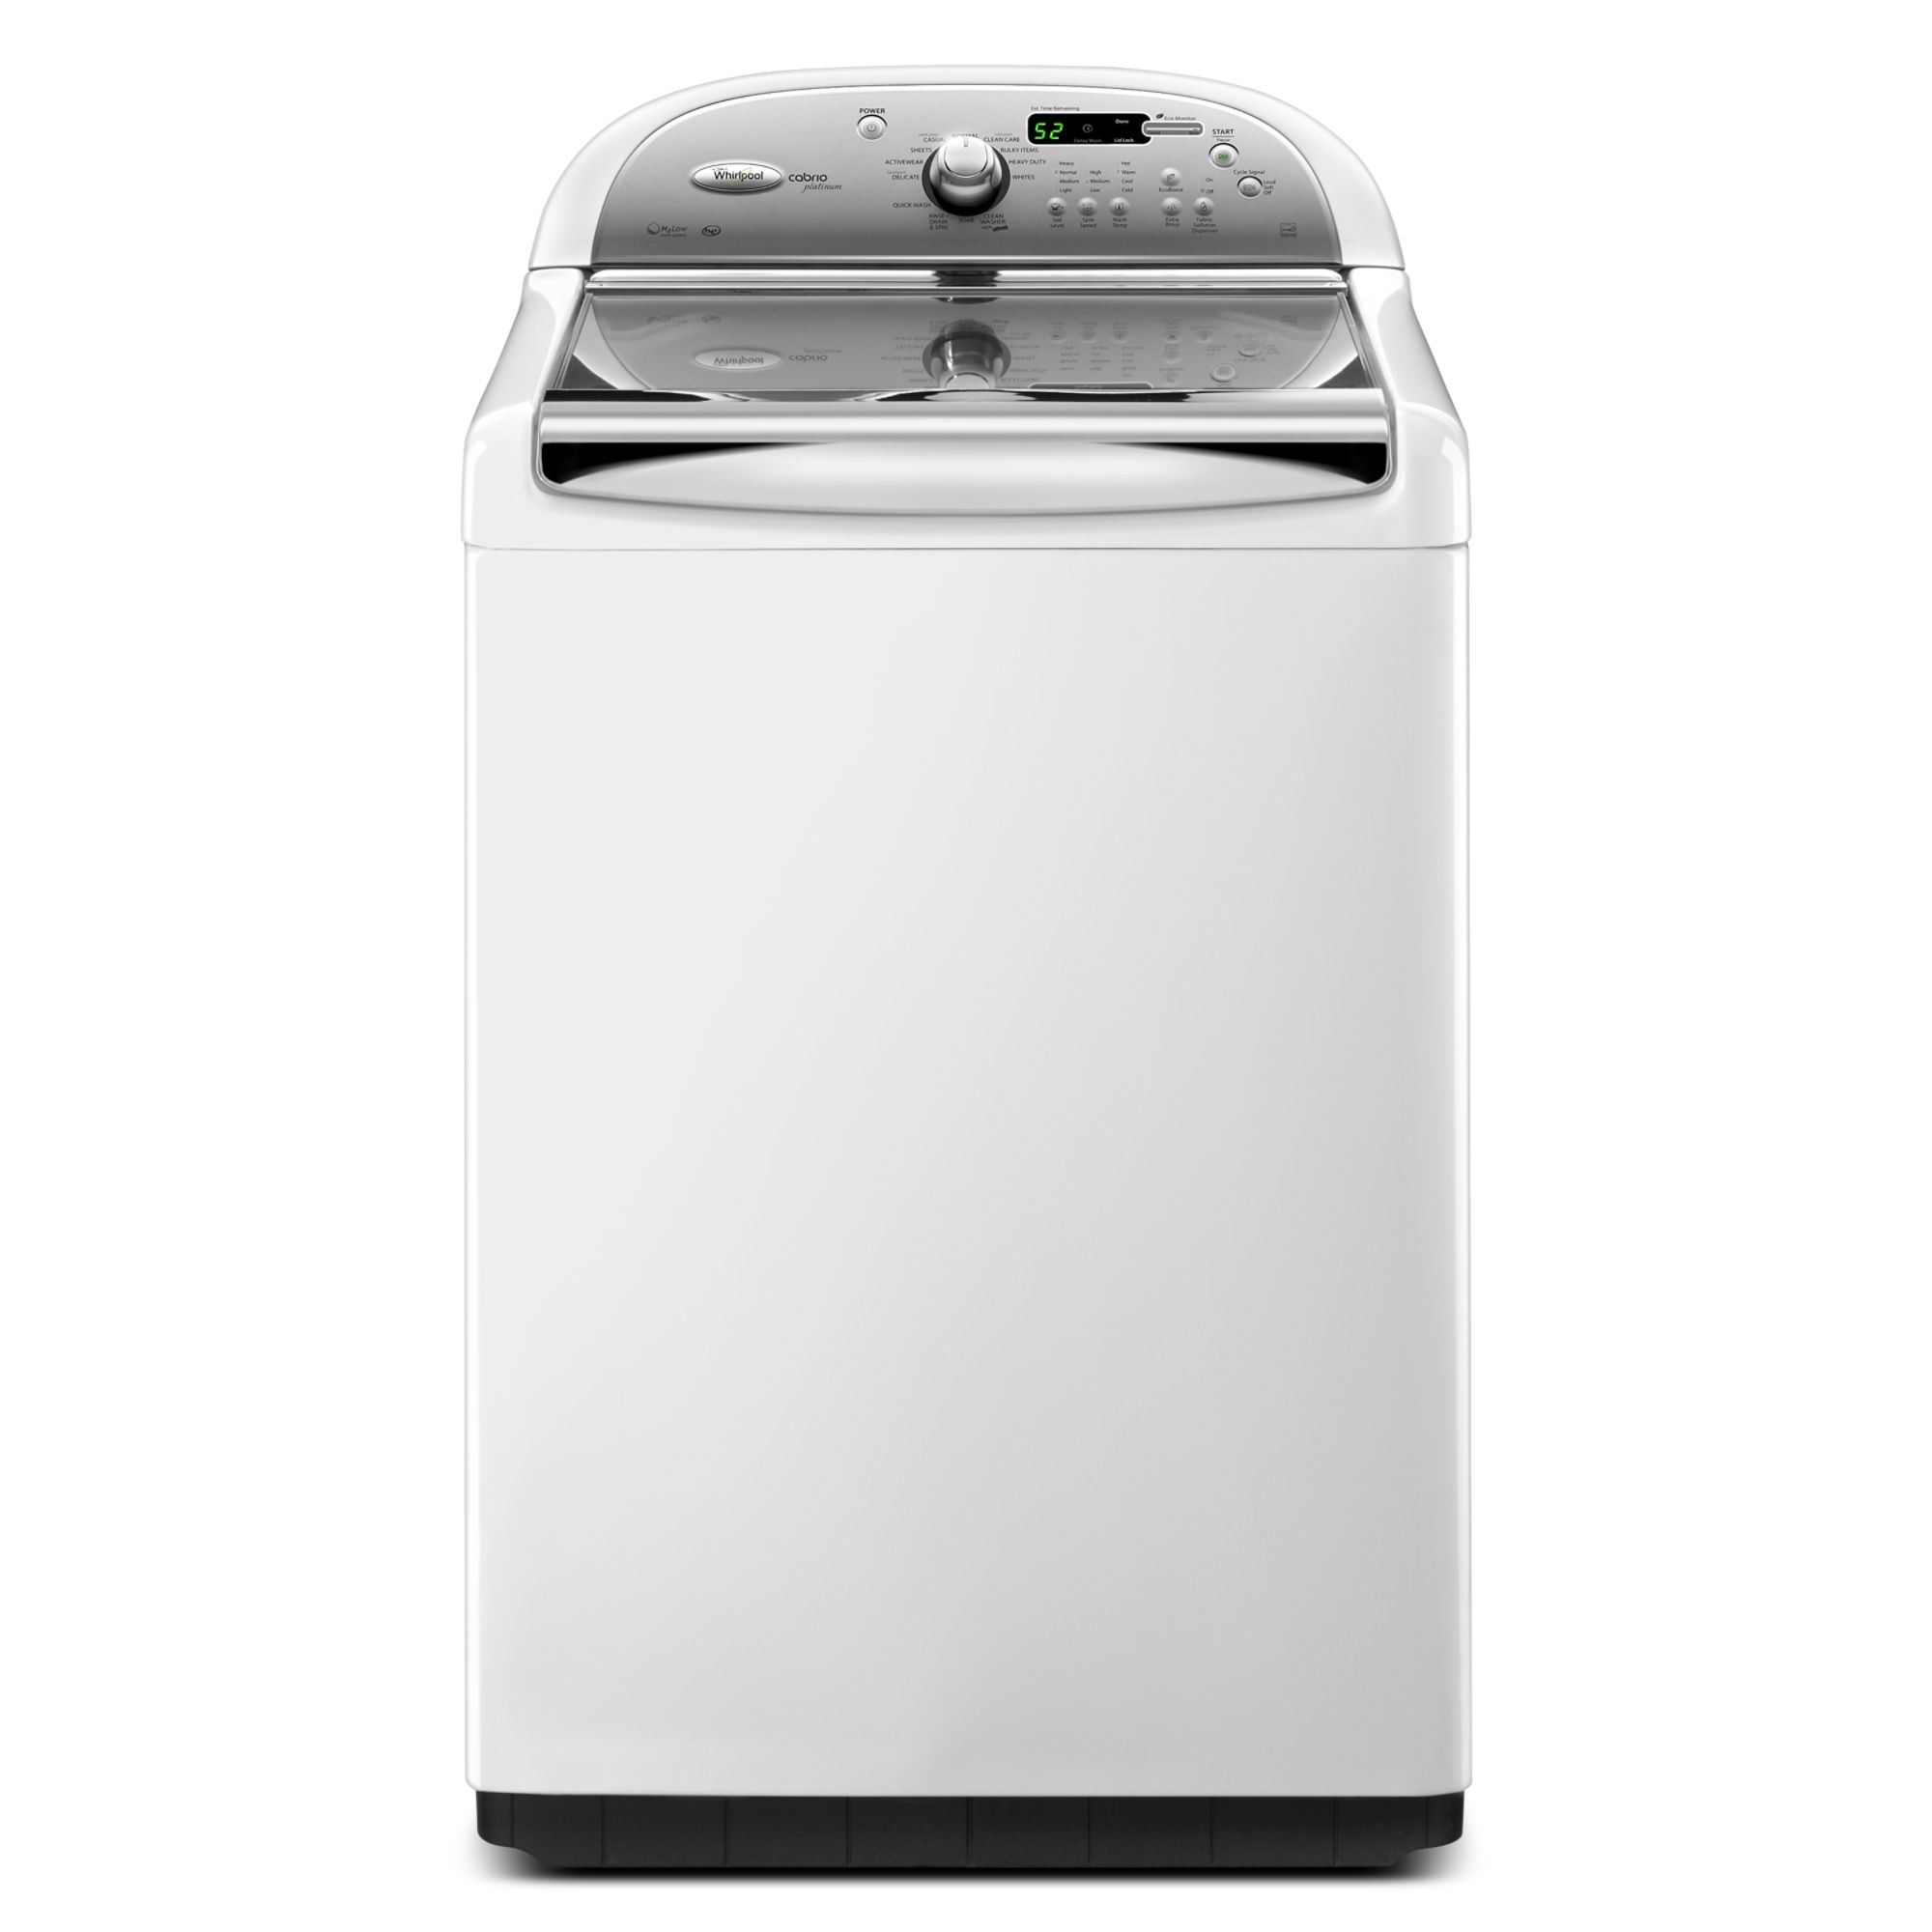 Whirlpool 4.6 cu. ft. High-Efficiency Top-Load Washer w/ Clean Care Cycle - White